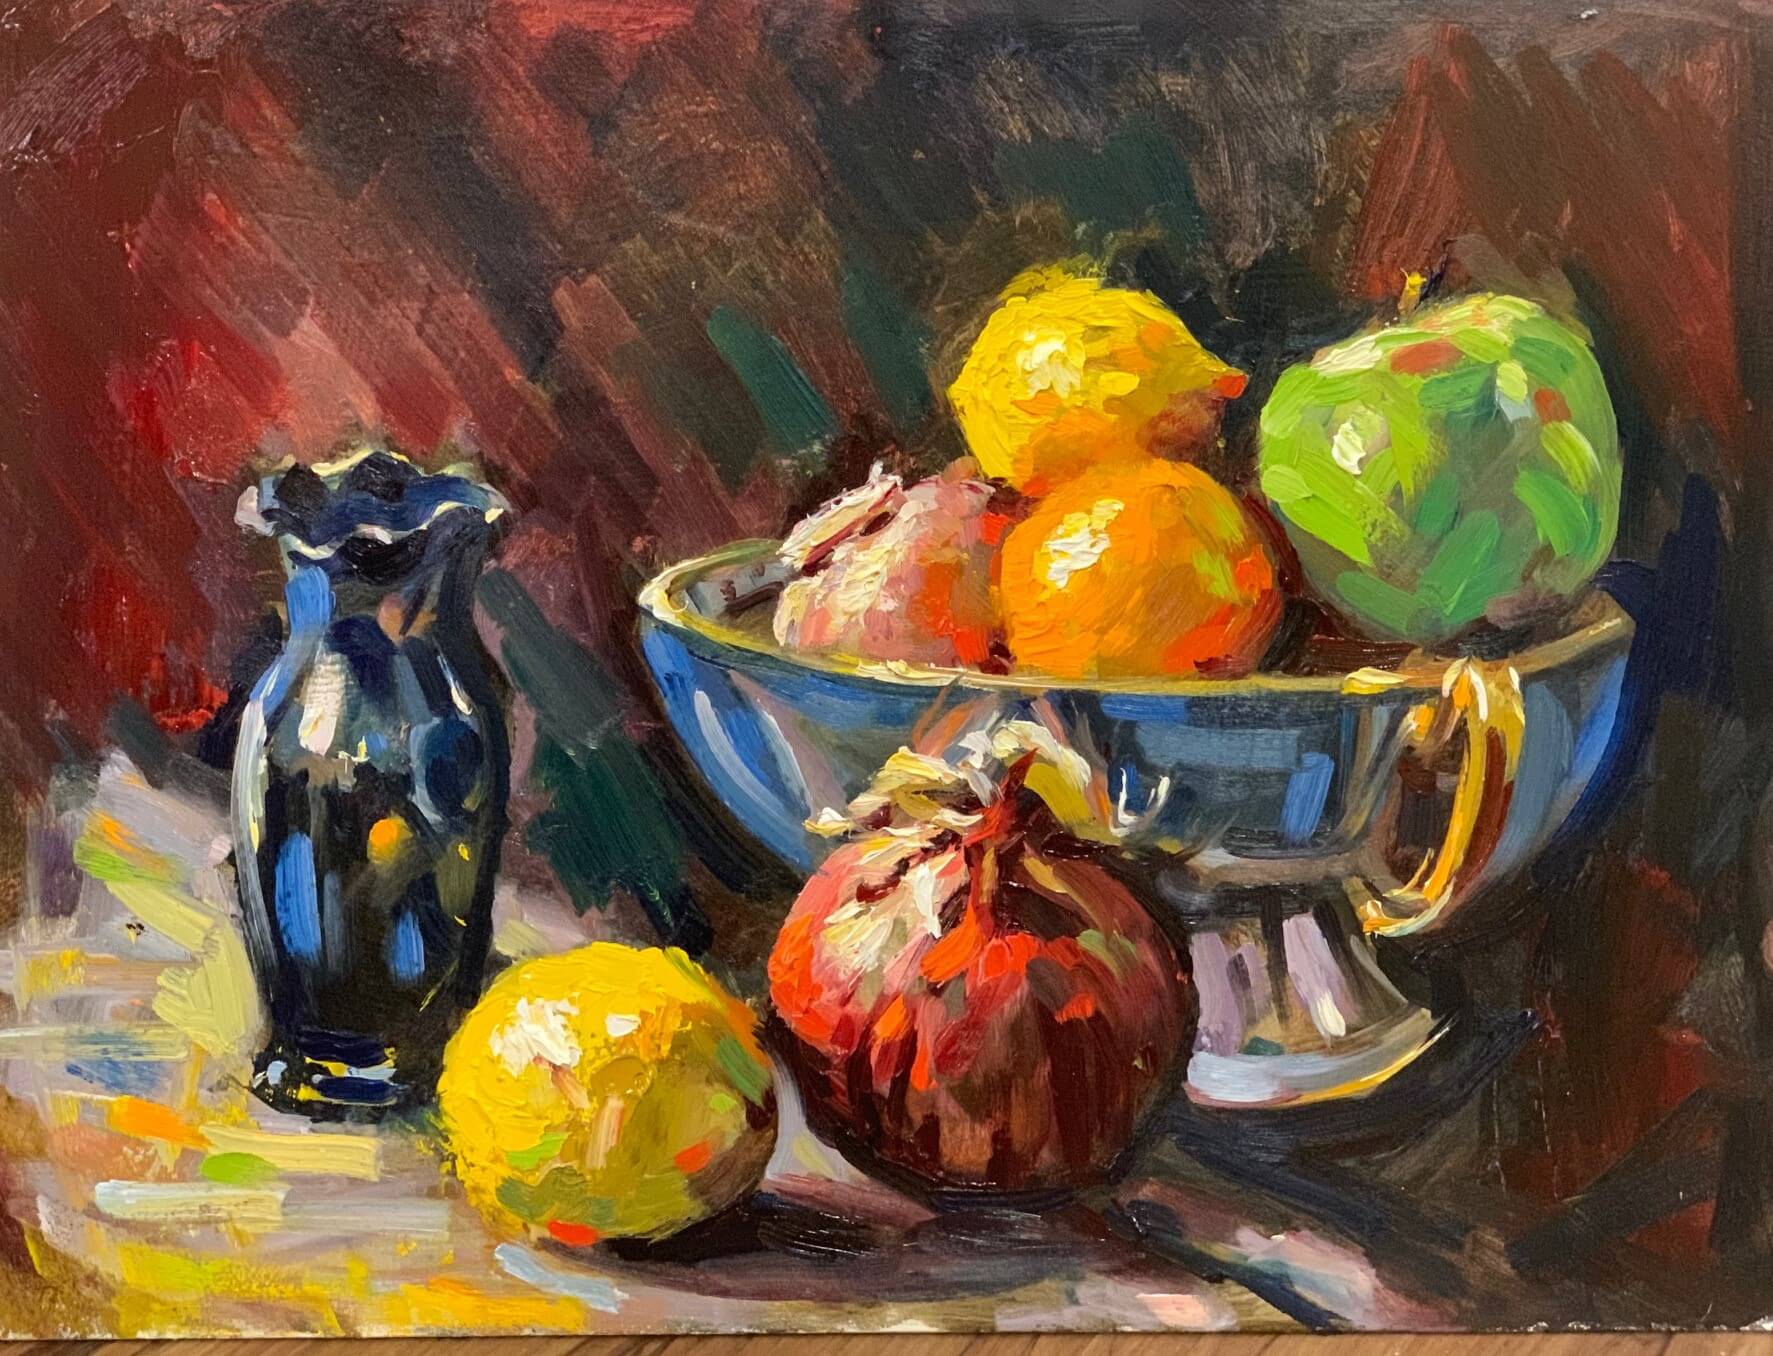 Vase and Bowl of Fruit - Maniscalco Gallery